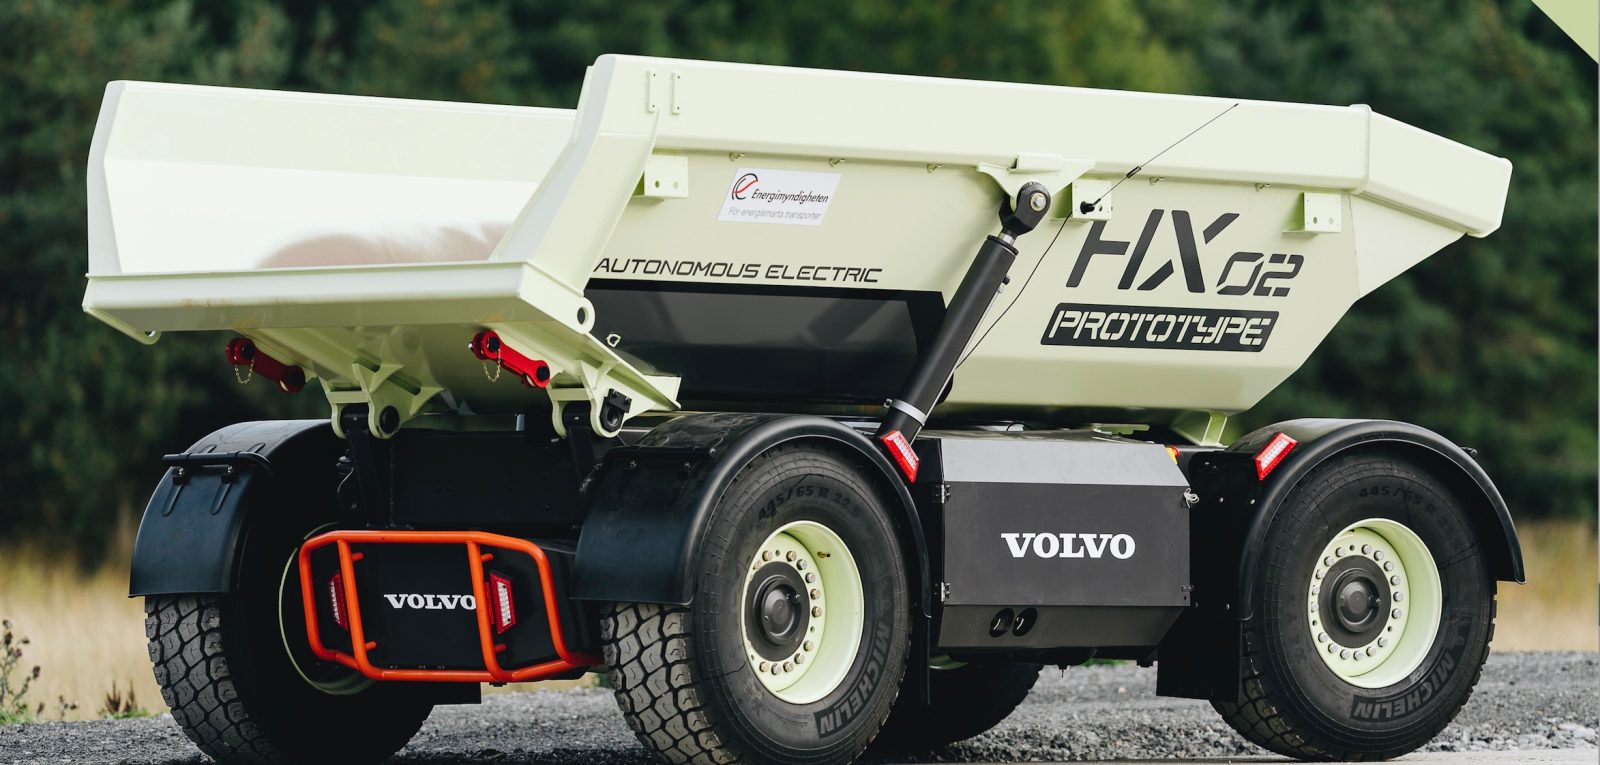 Volvo deploys several new electric mining vehicle prototypes to reduce